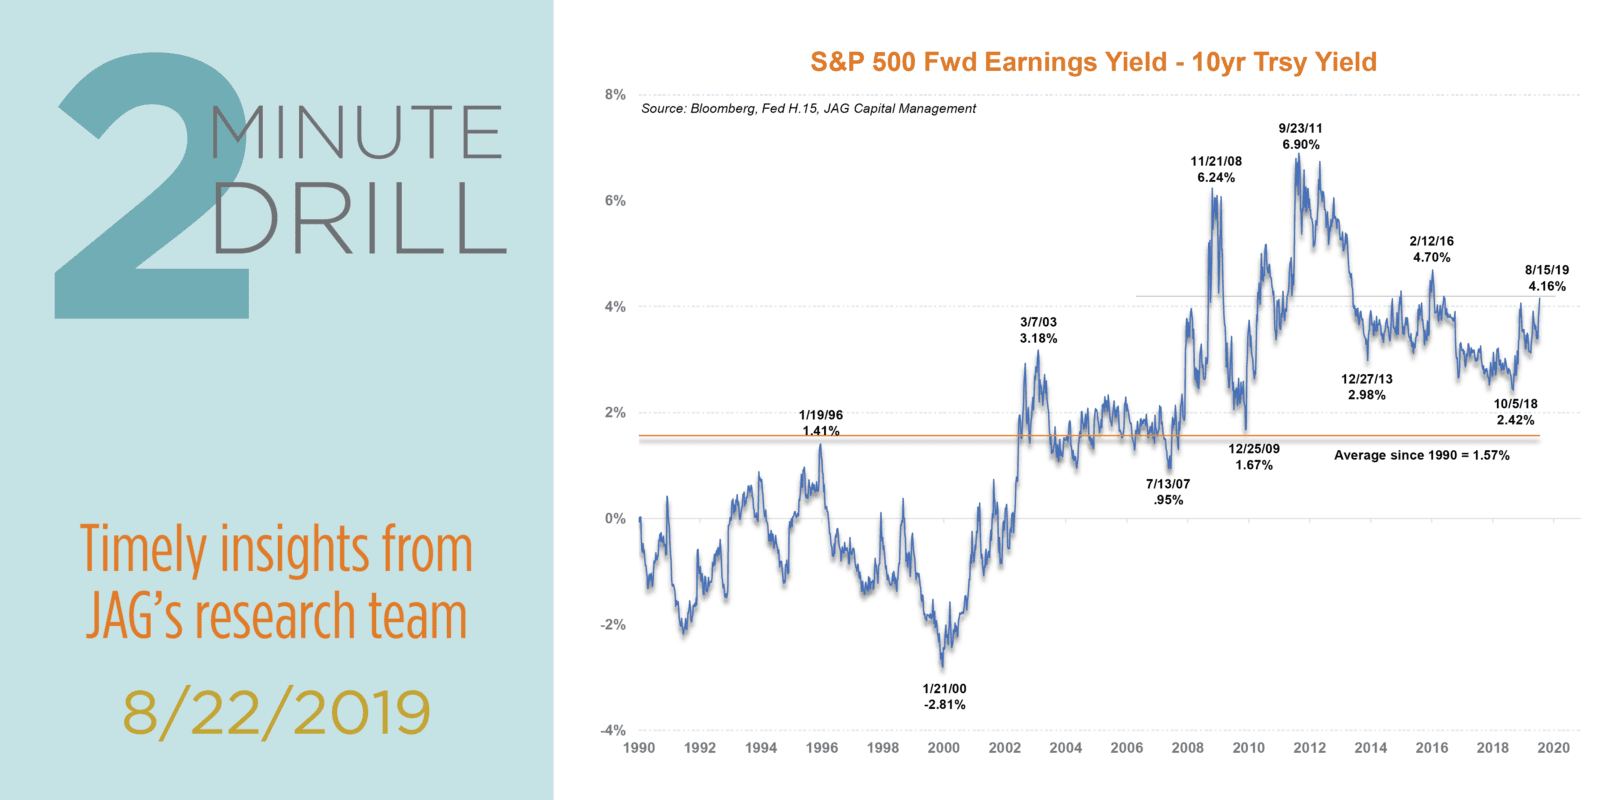 Are Rising Earnings Yields Pointing to Opportunity?